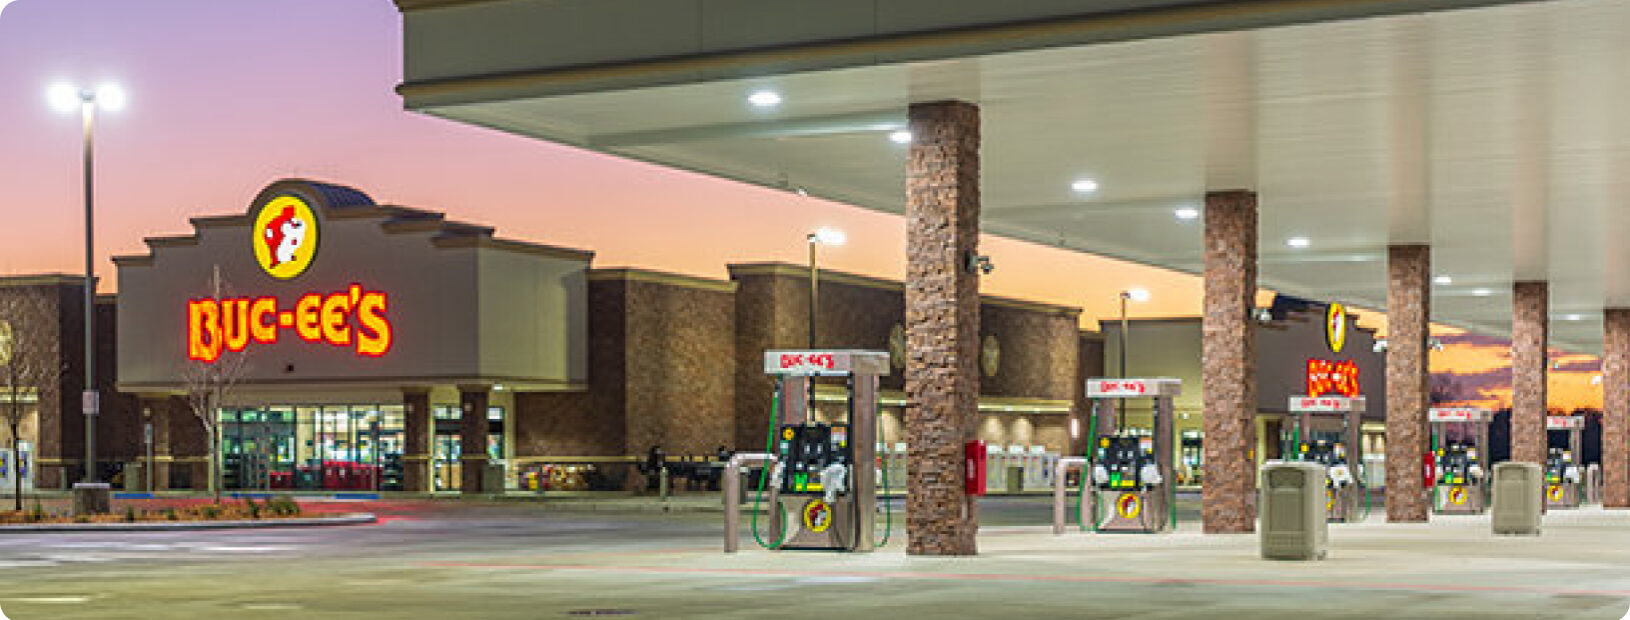 Wide-angle photo of Buc-ee's convenience store & gas station location with fuel pumps in foreground.